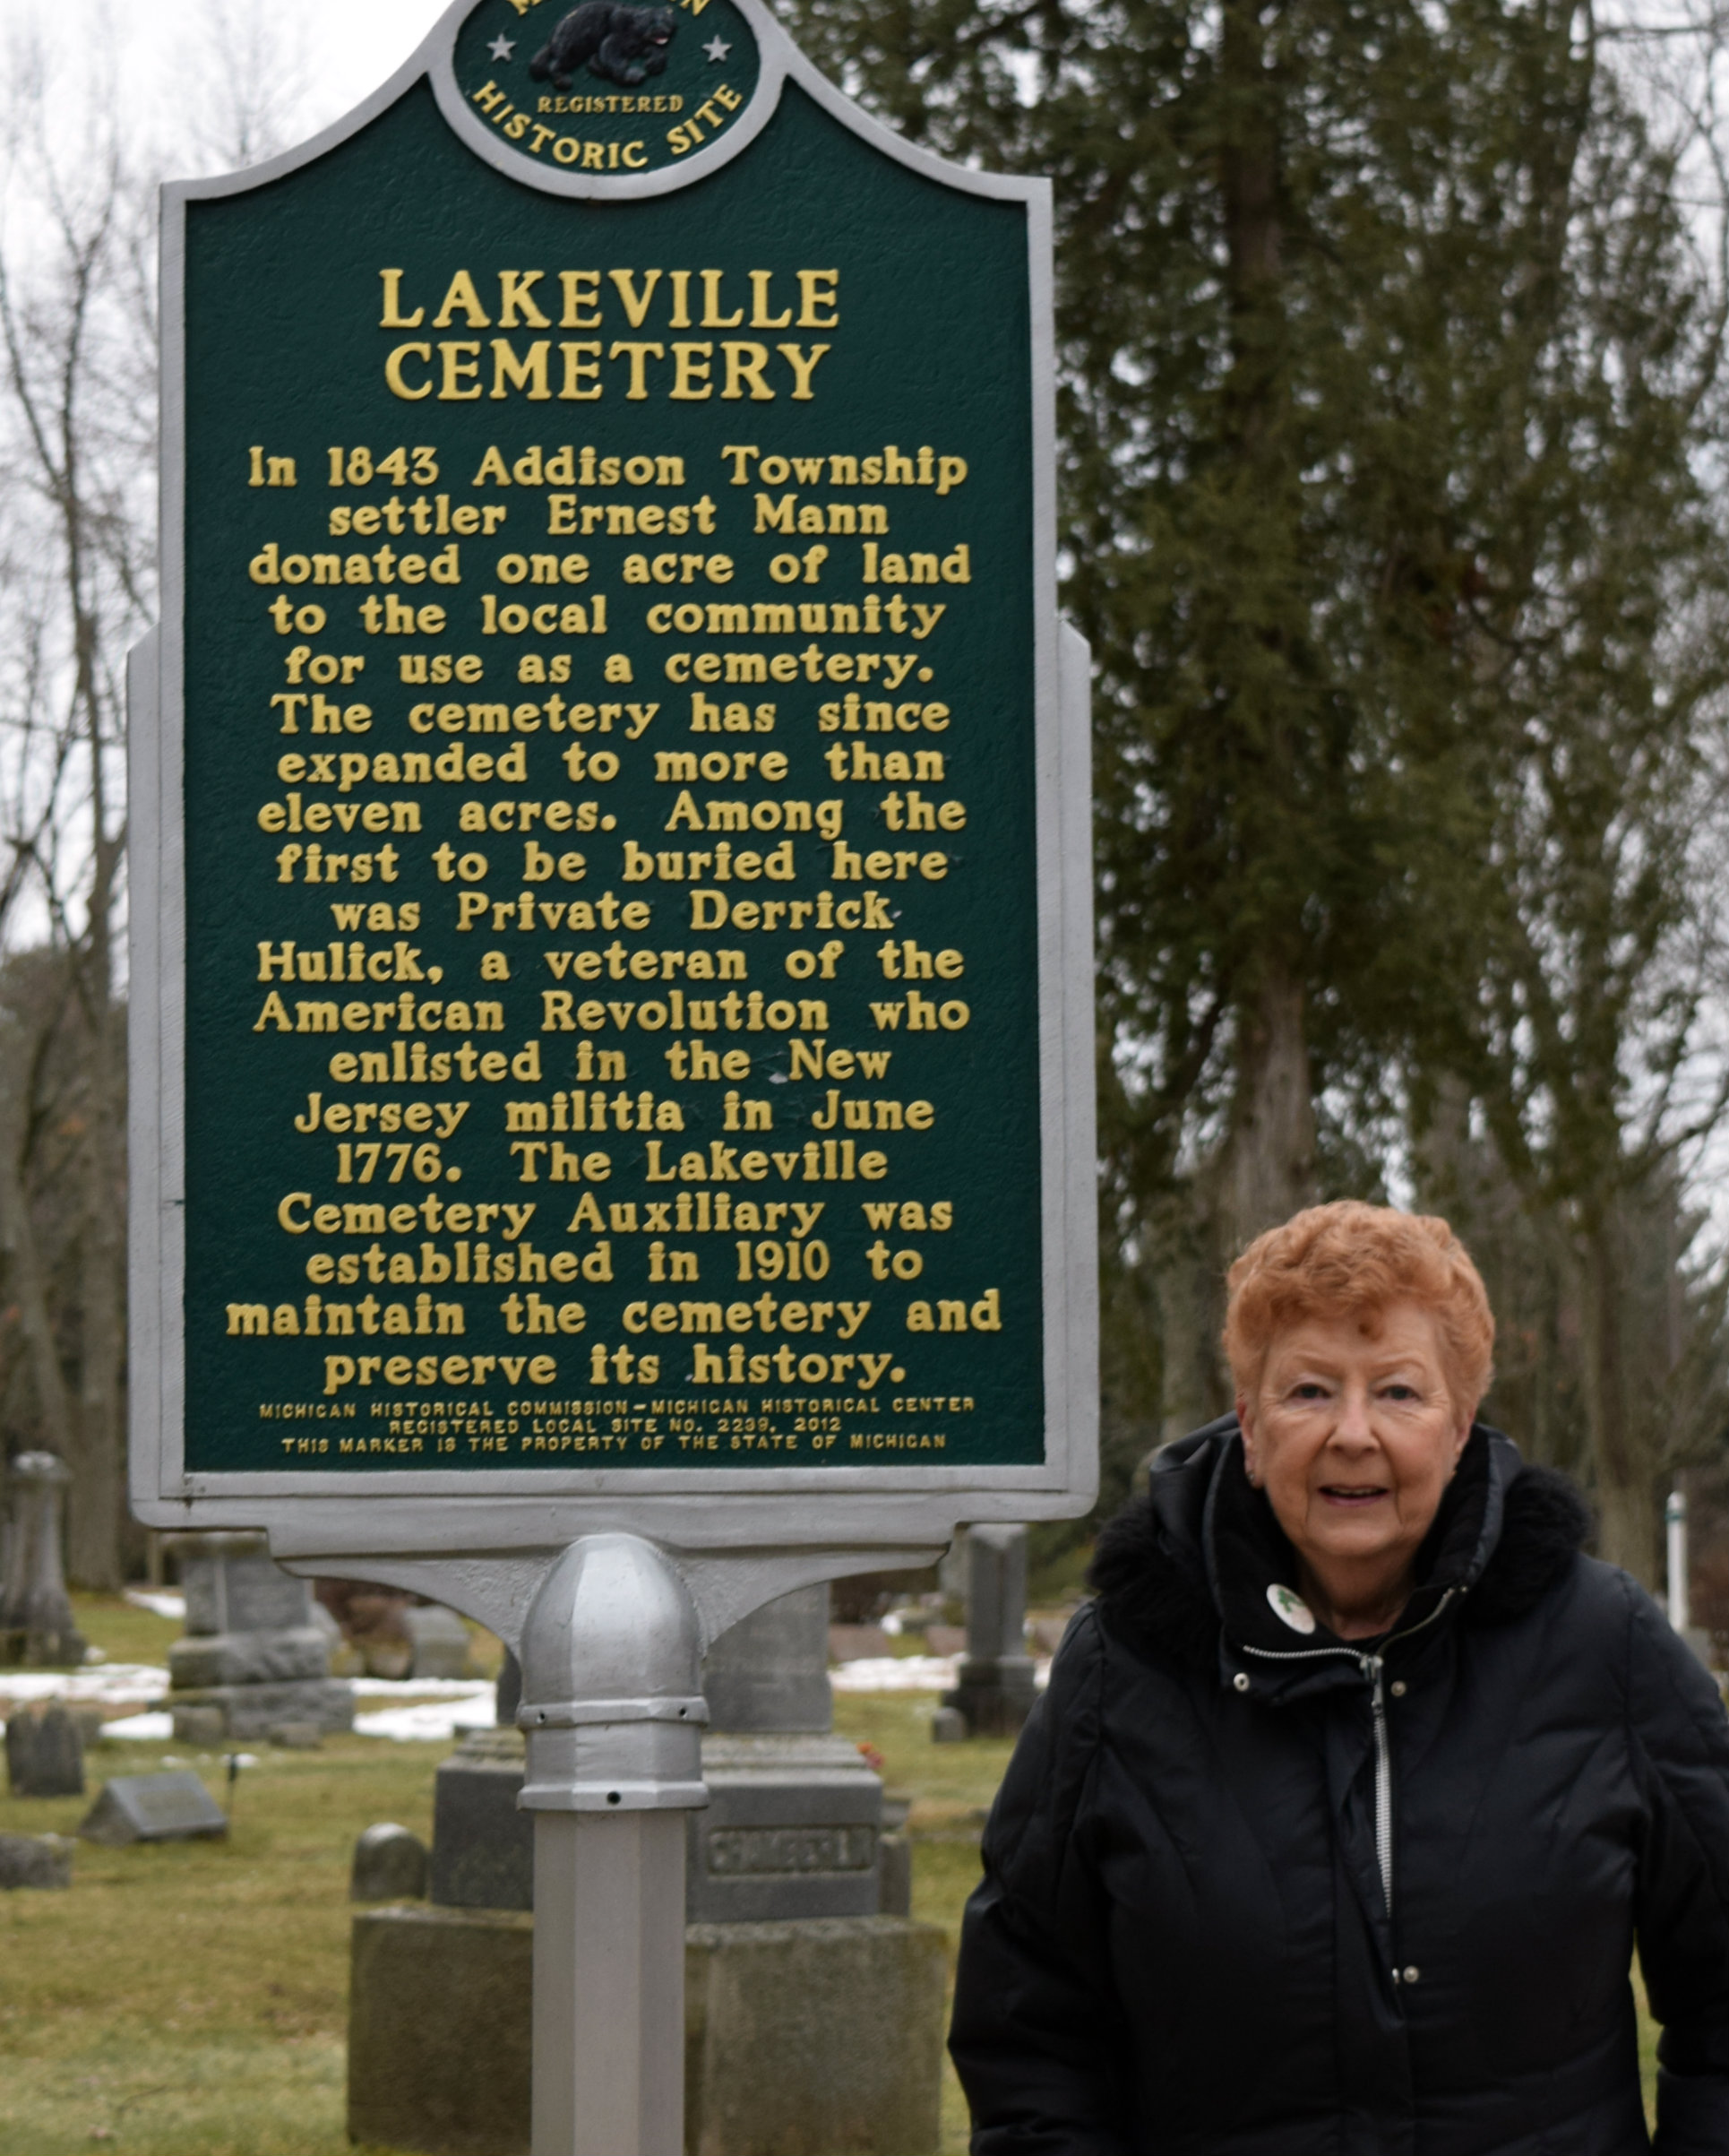 Marlene Mallia, president of the Lakeville Cemetery Auxiliary, poses next to the state historical marker. Photo by Elise Shire.